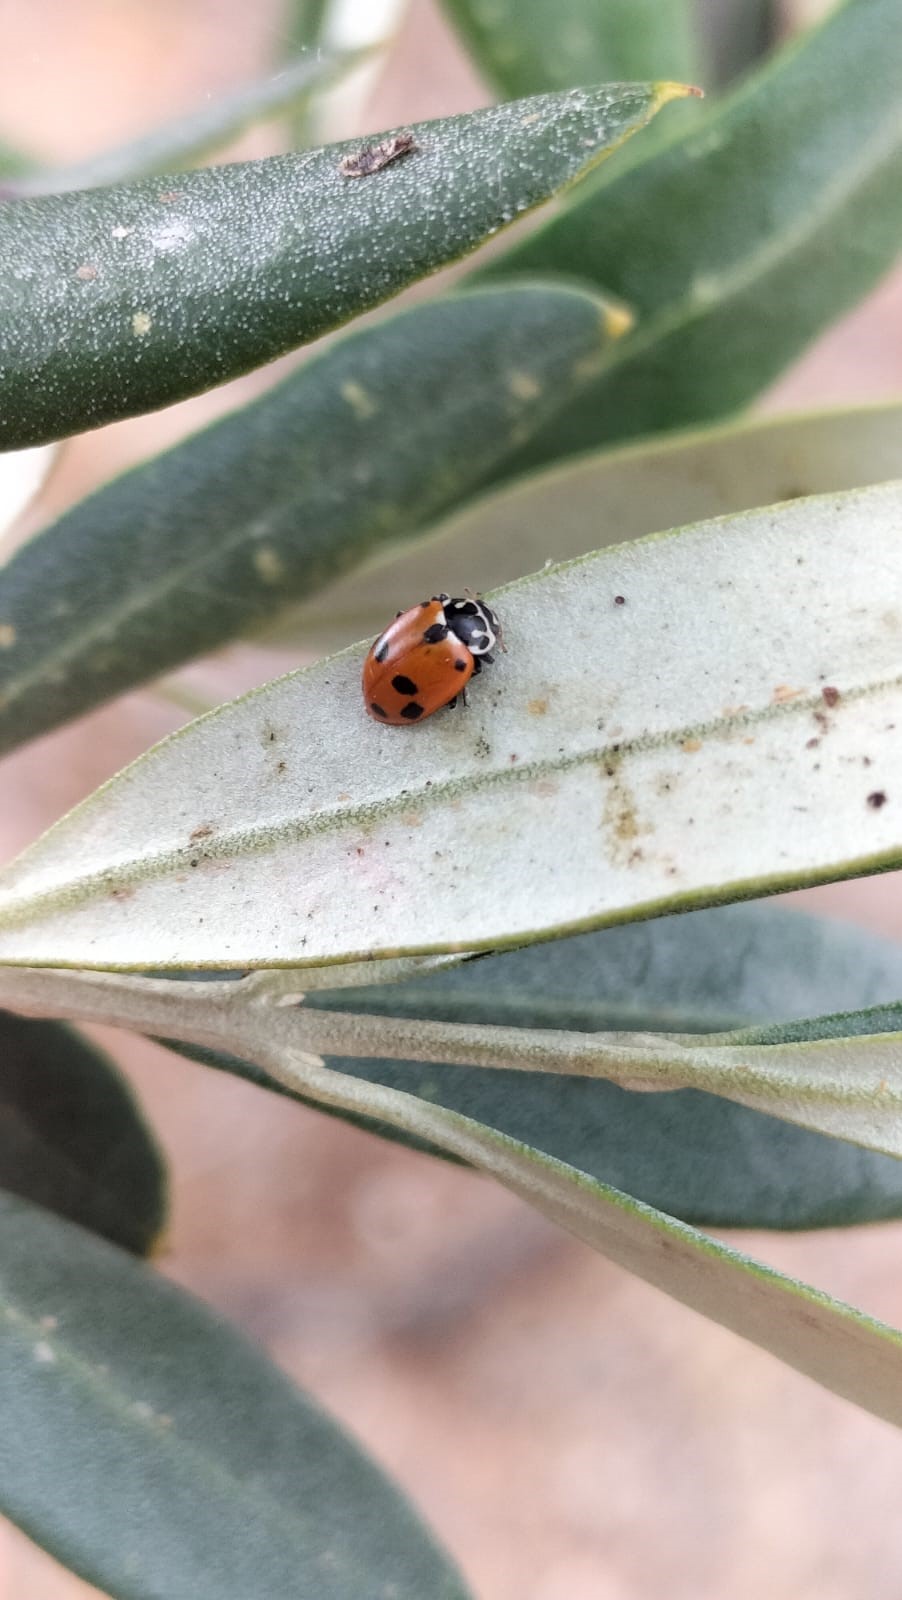 Olive lace bug (top leaf) and ladybird